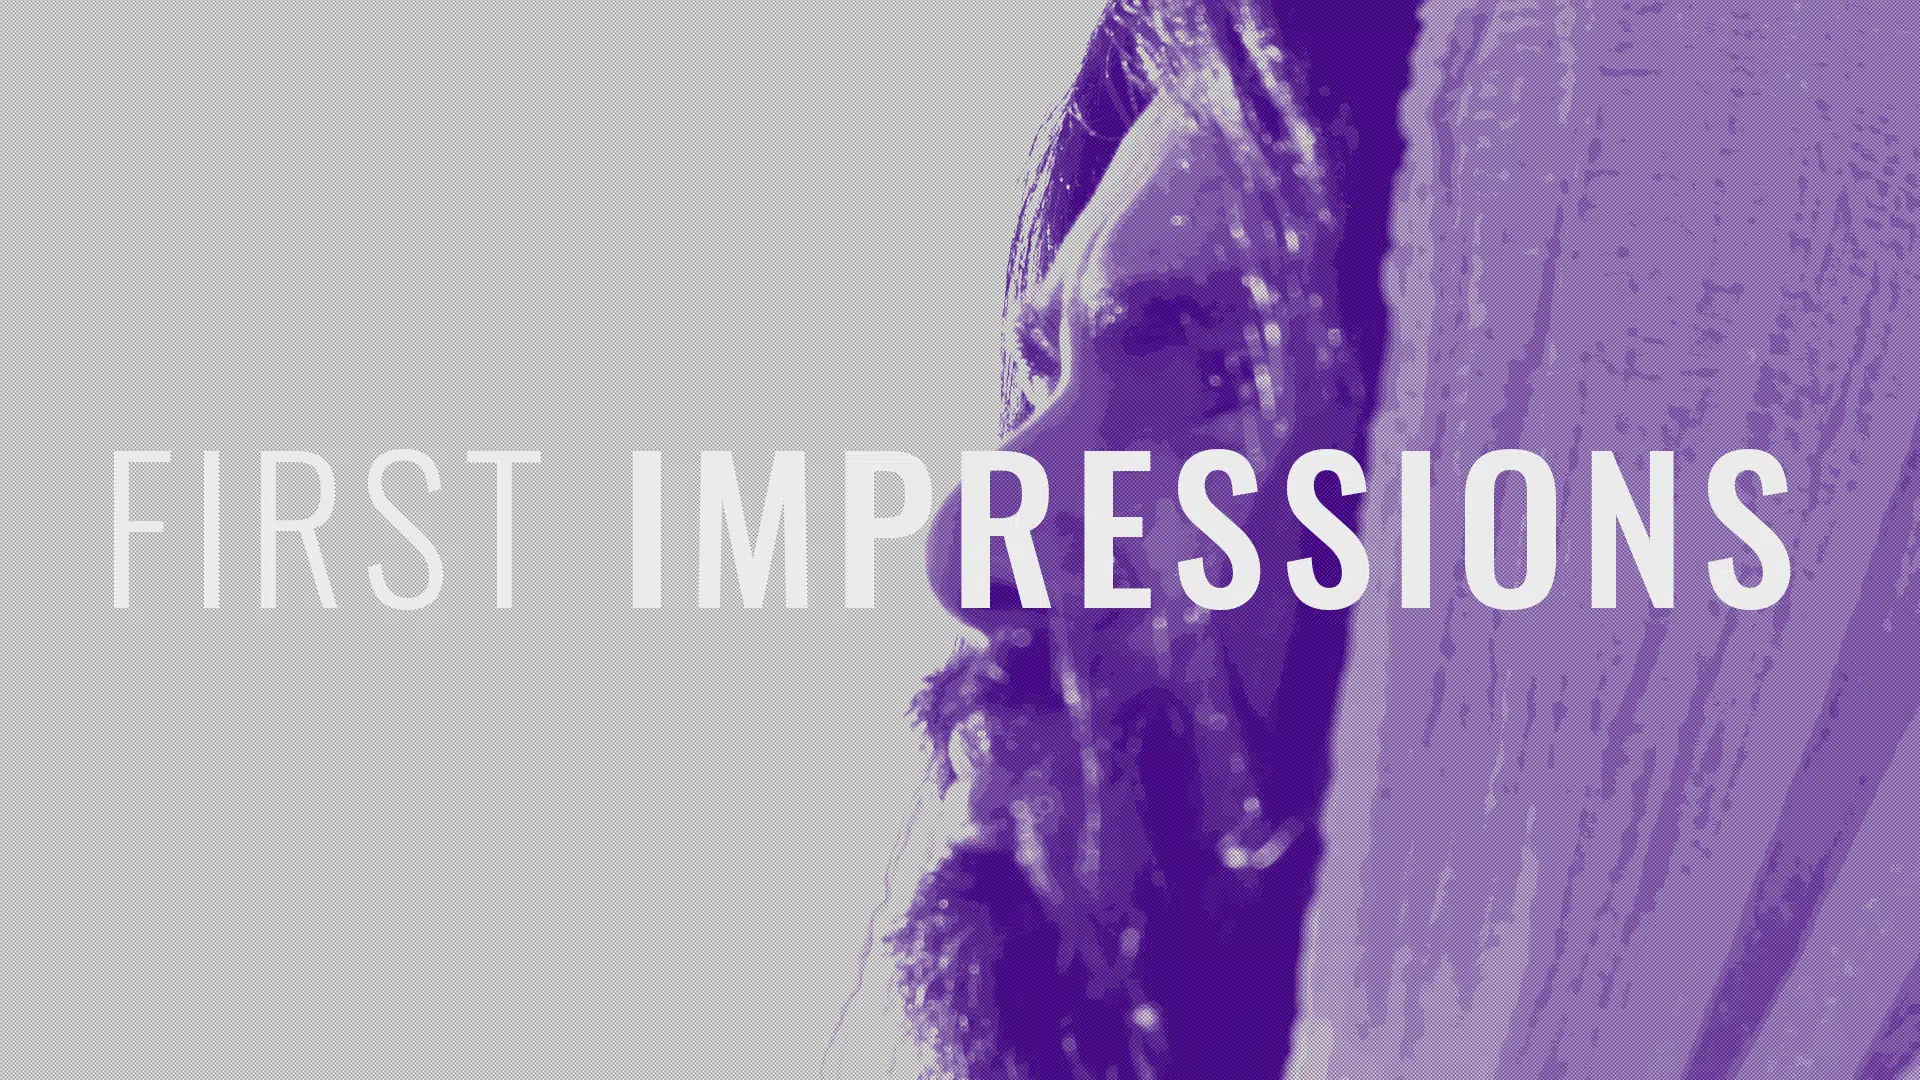 Featured image for “First Impressions”